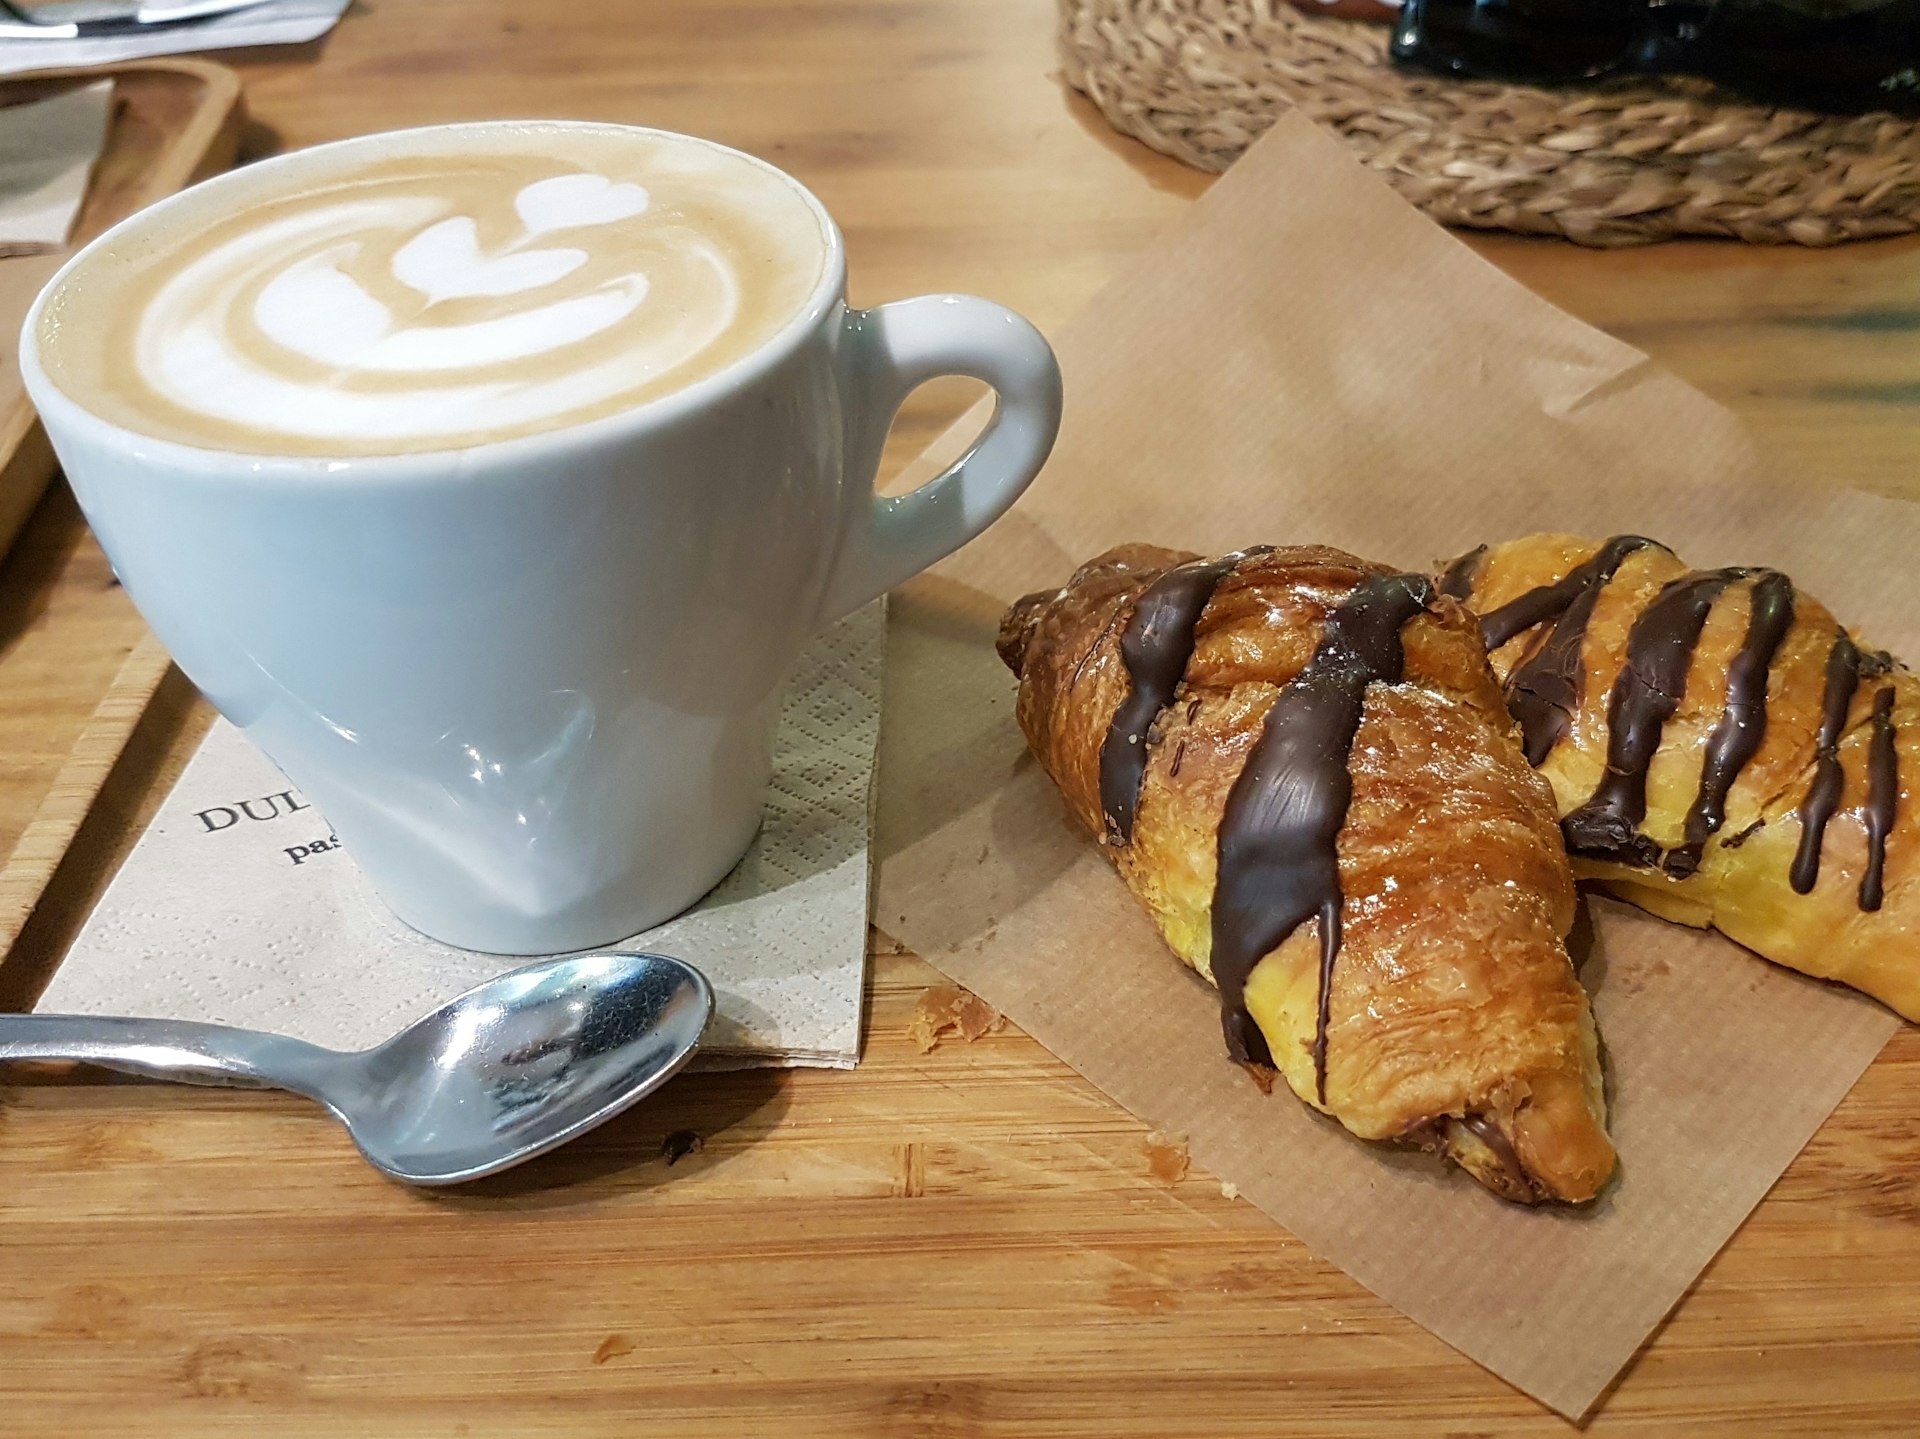 Coffee and chocolate croissants at Dulce de Leche, Valencia